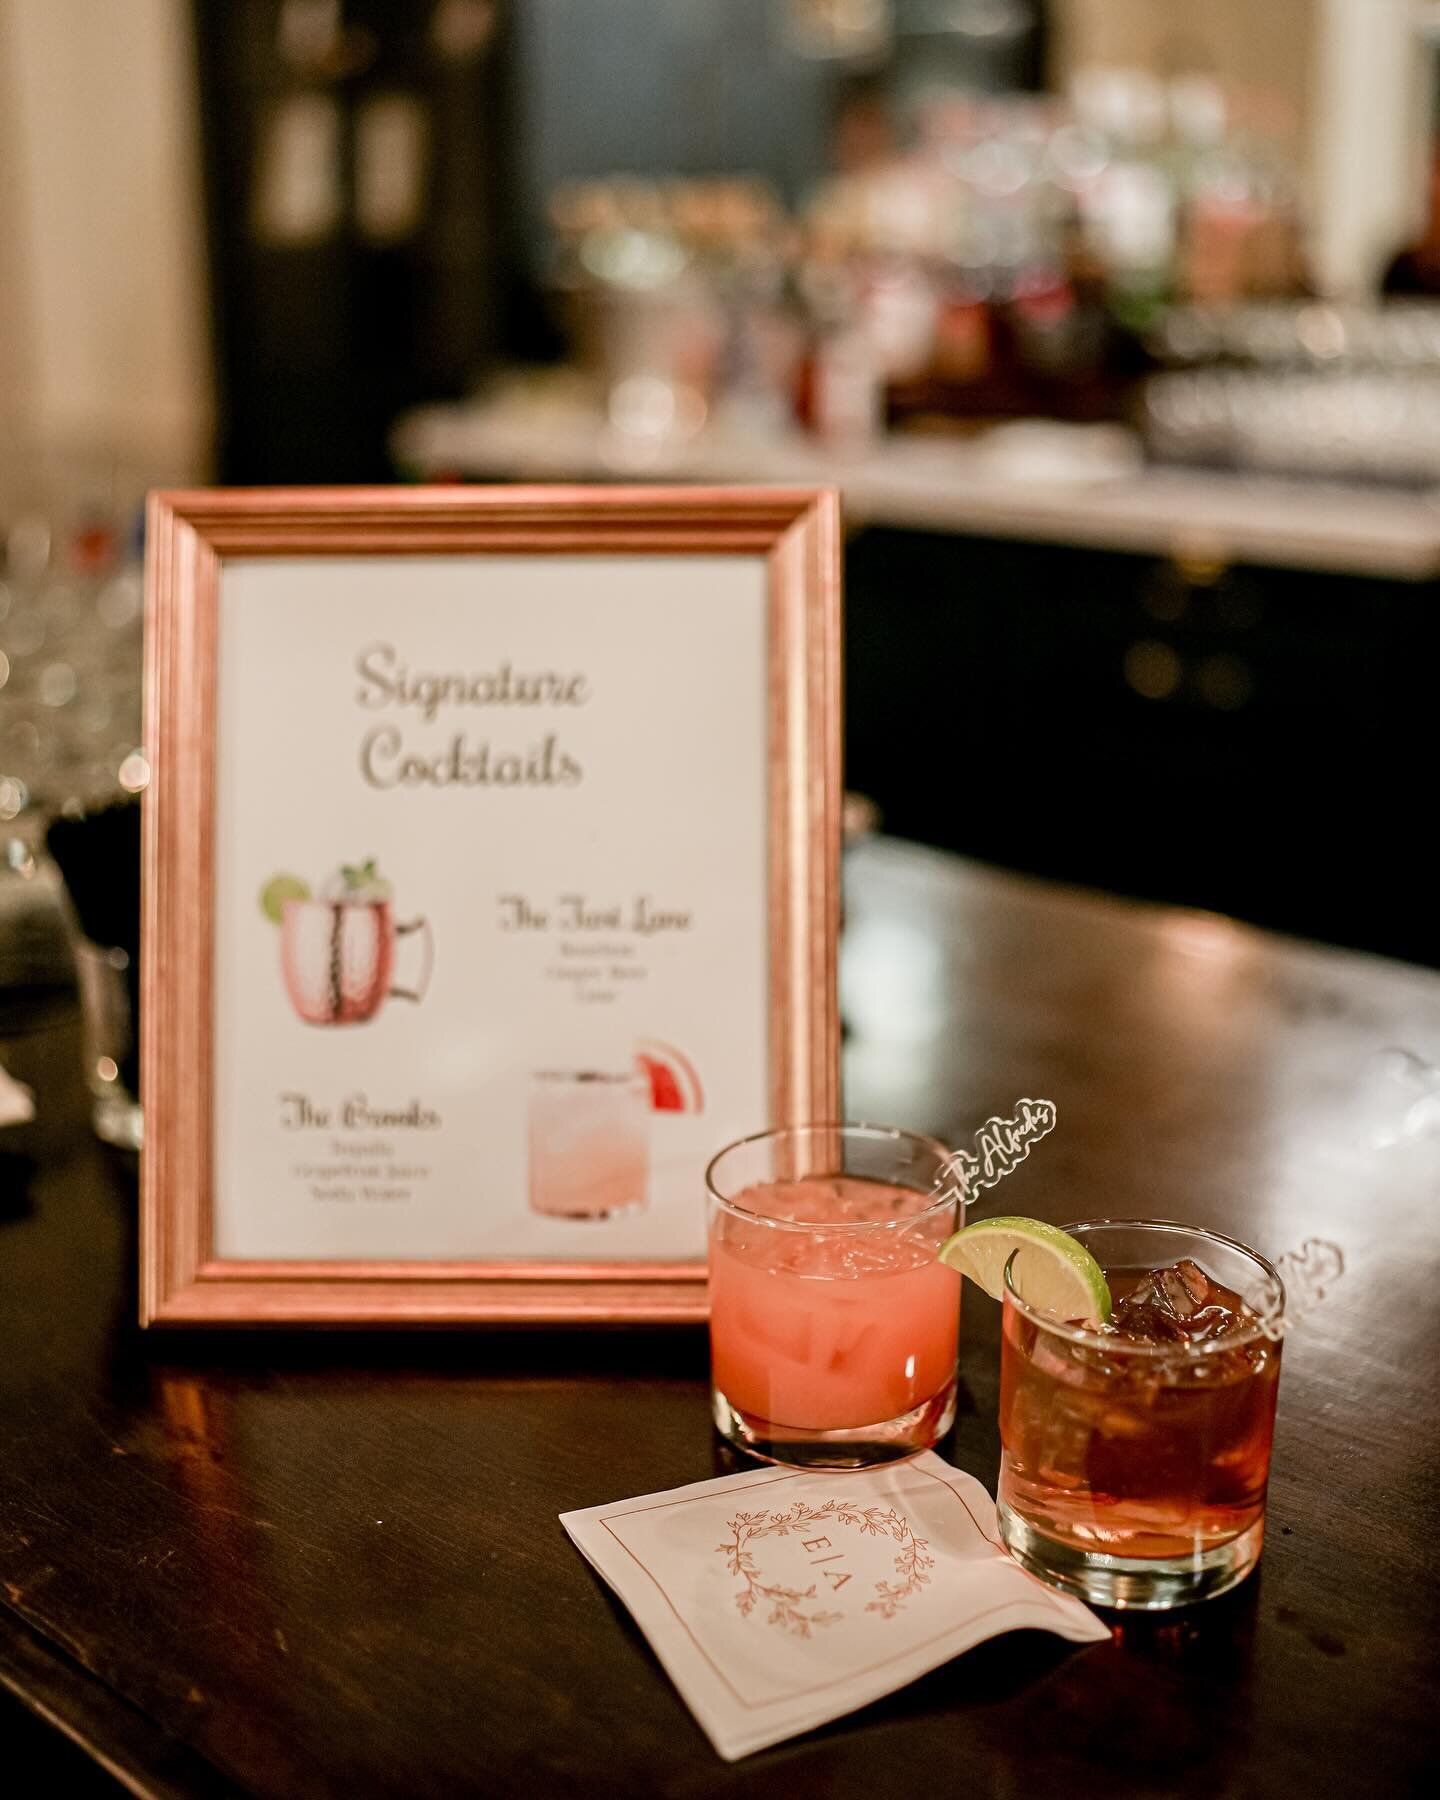 Sip and celebrate with a signature cocktail 🍸 

A trend we&rsquo;re loving is signature drinks to personalize your guests experience. Add a customized stir stick or bar napkin to give it that extra something special. If you&rsquo;ve booked with us, 